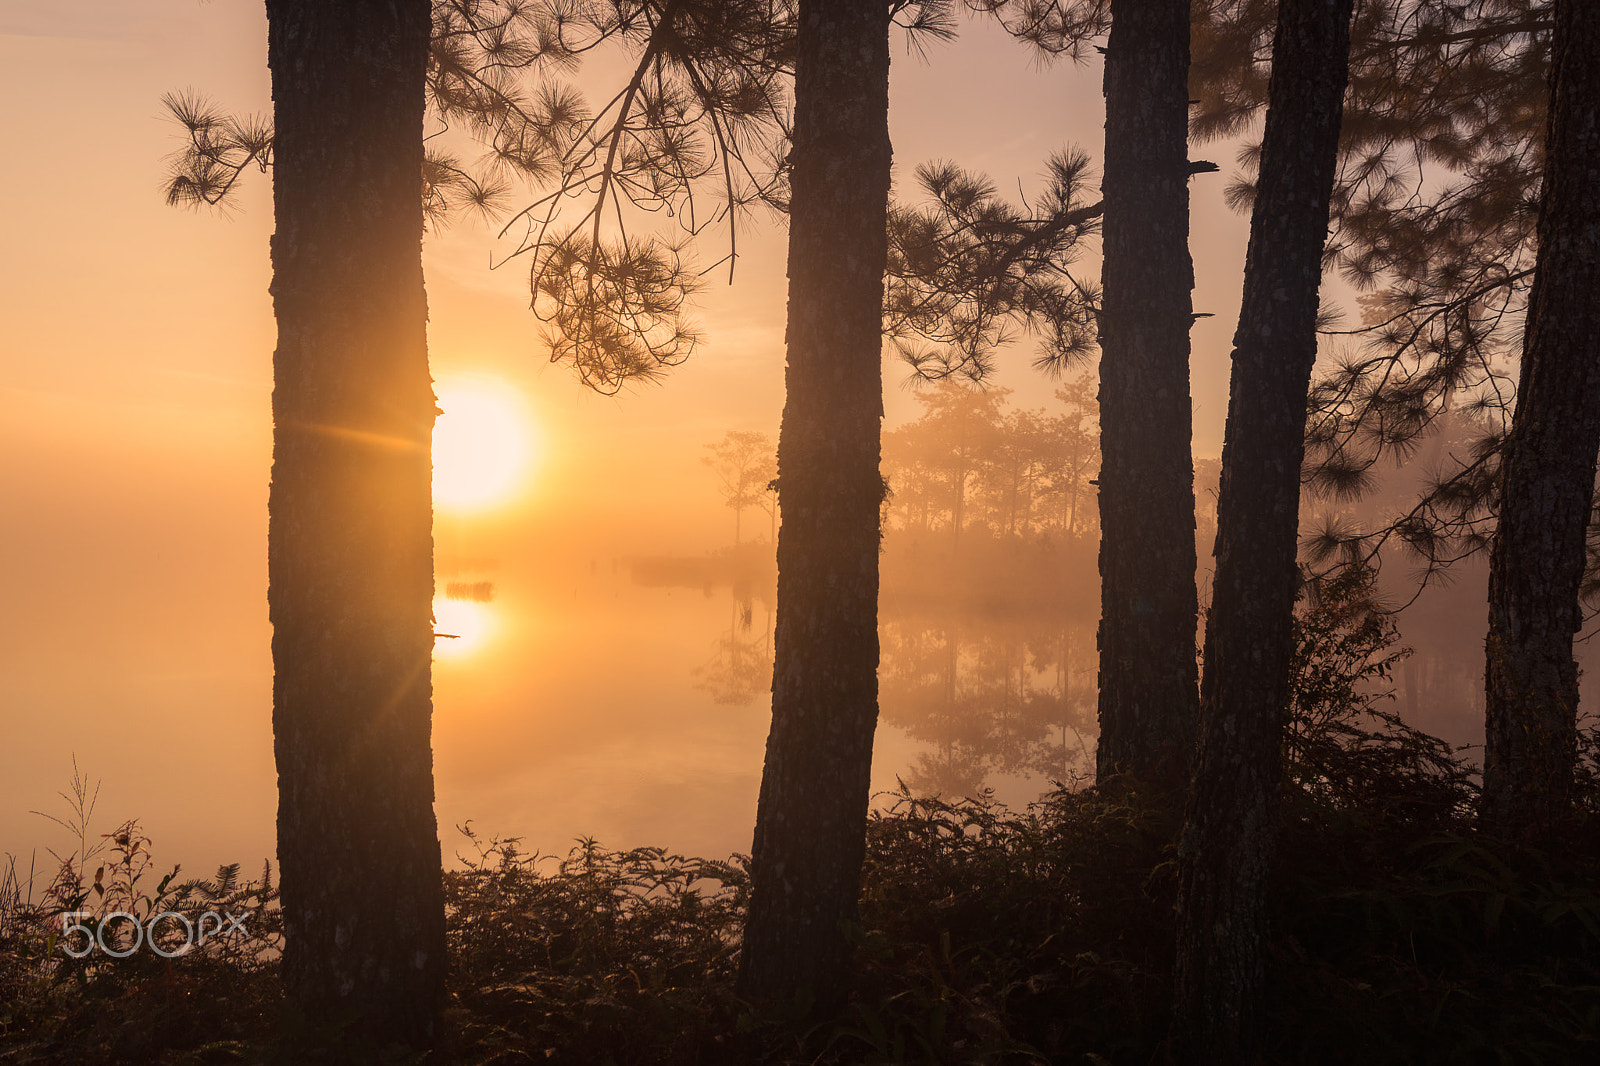 Nikon D5200 + Sigma 17-70mm F2.8-4 DC Macro OS HSM | C sample photo. Lake and pine forest. photography